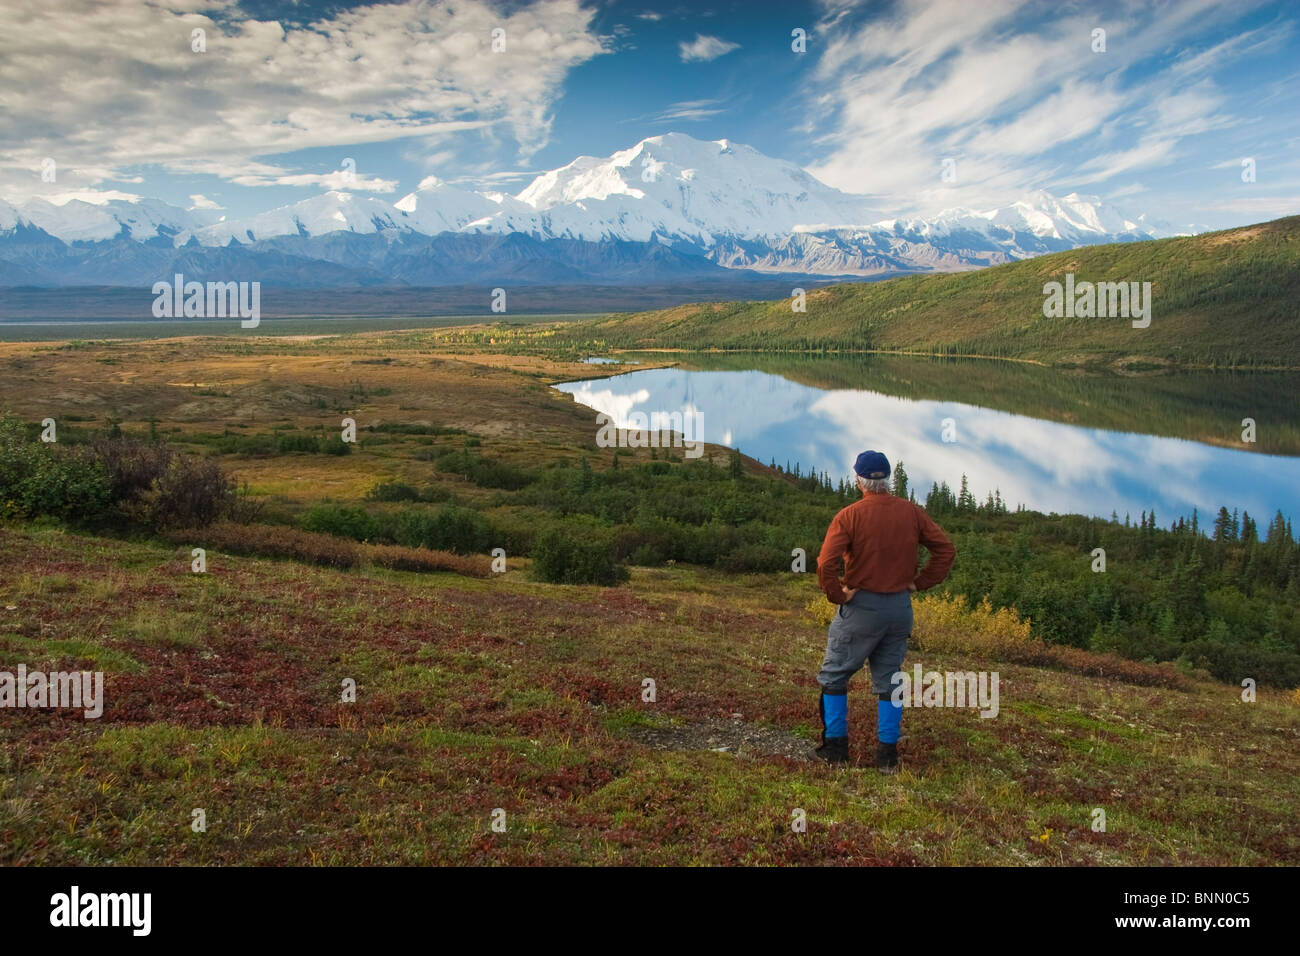 Mature male hiker views Mt. McKinley and the Alaska Range with Wonder Lake in the foreground, Denali National Park, Alaska Stock Photo